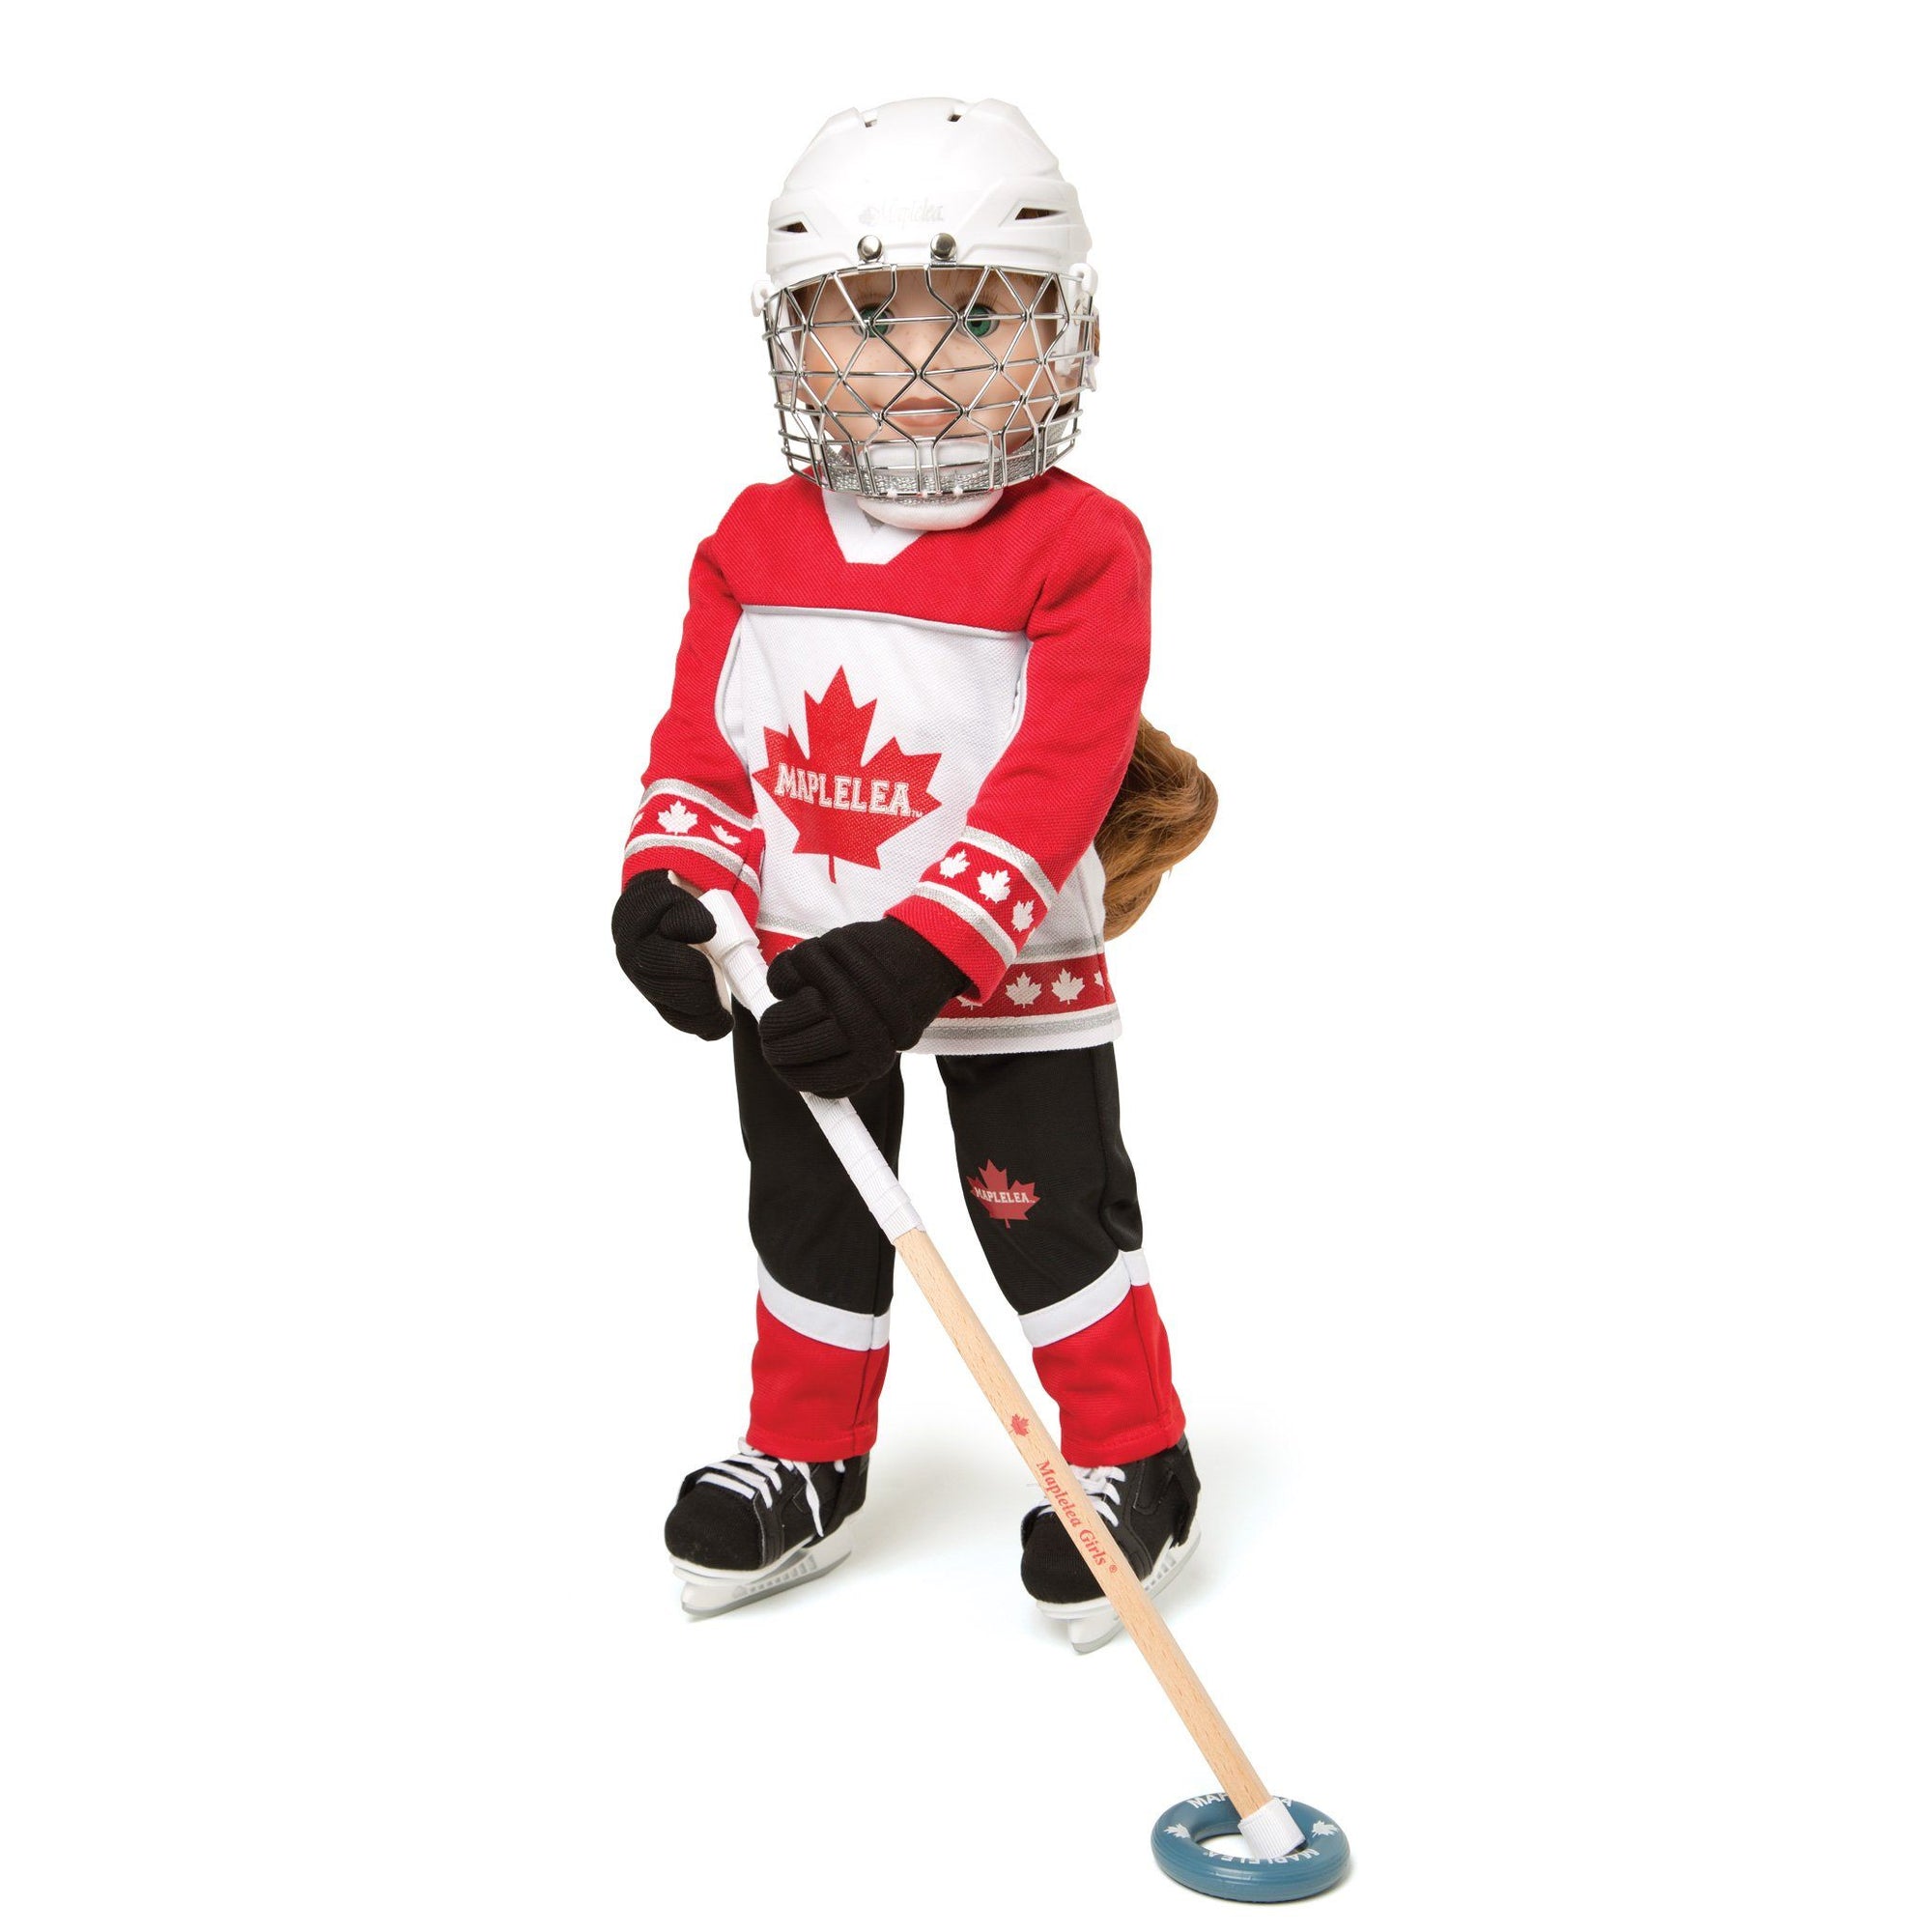 Ringette set with Helmet KM46, All Dolls, Sports and Dance